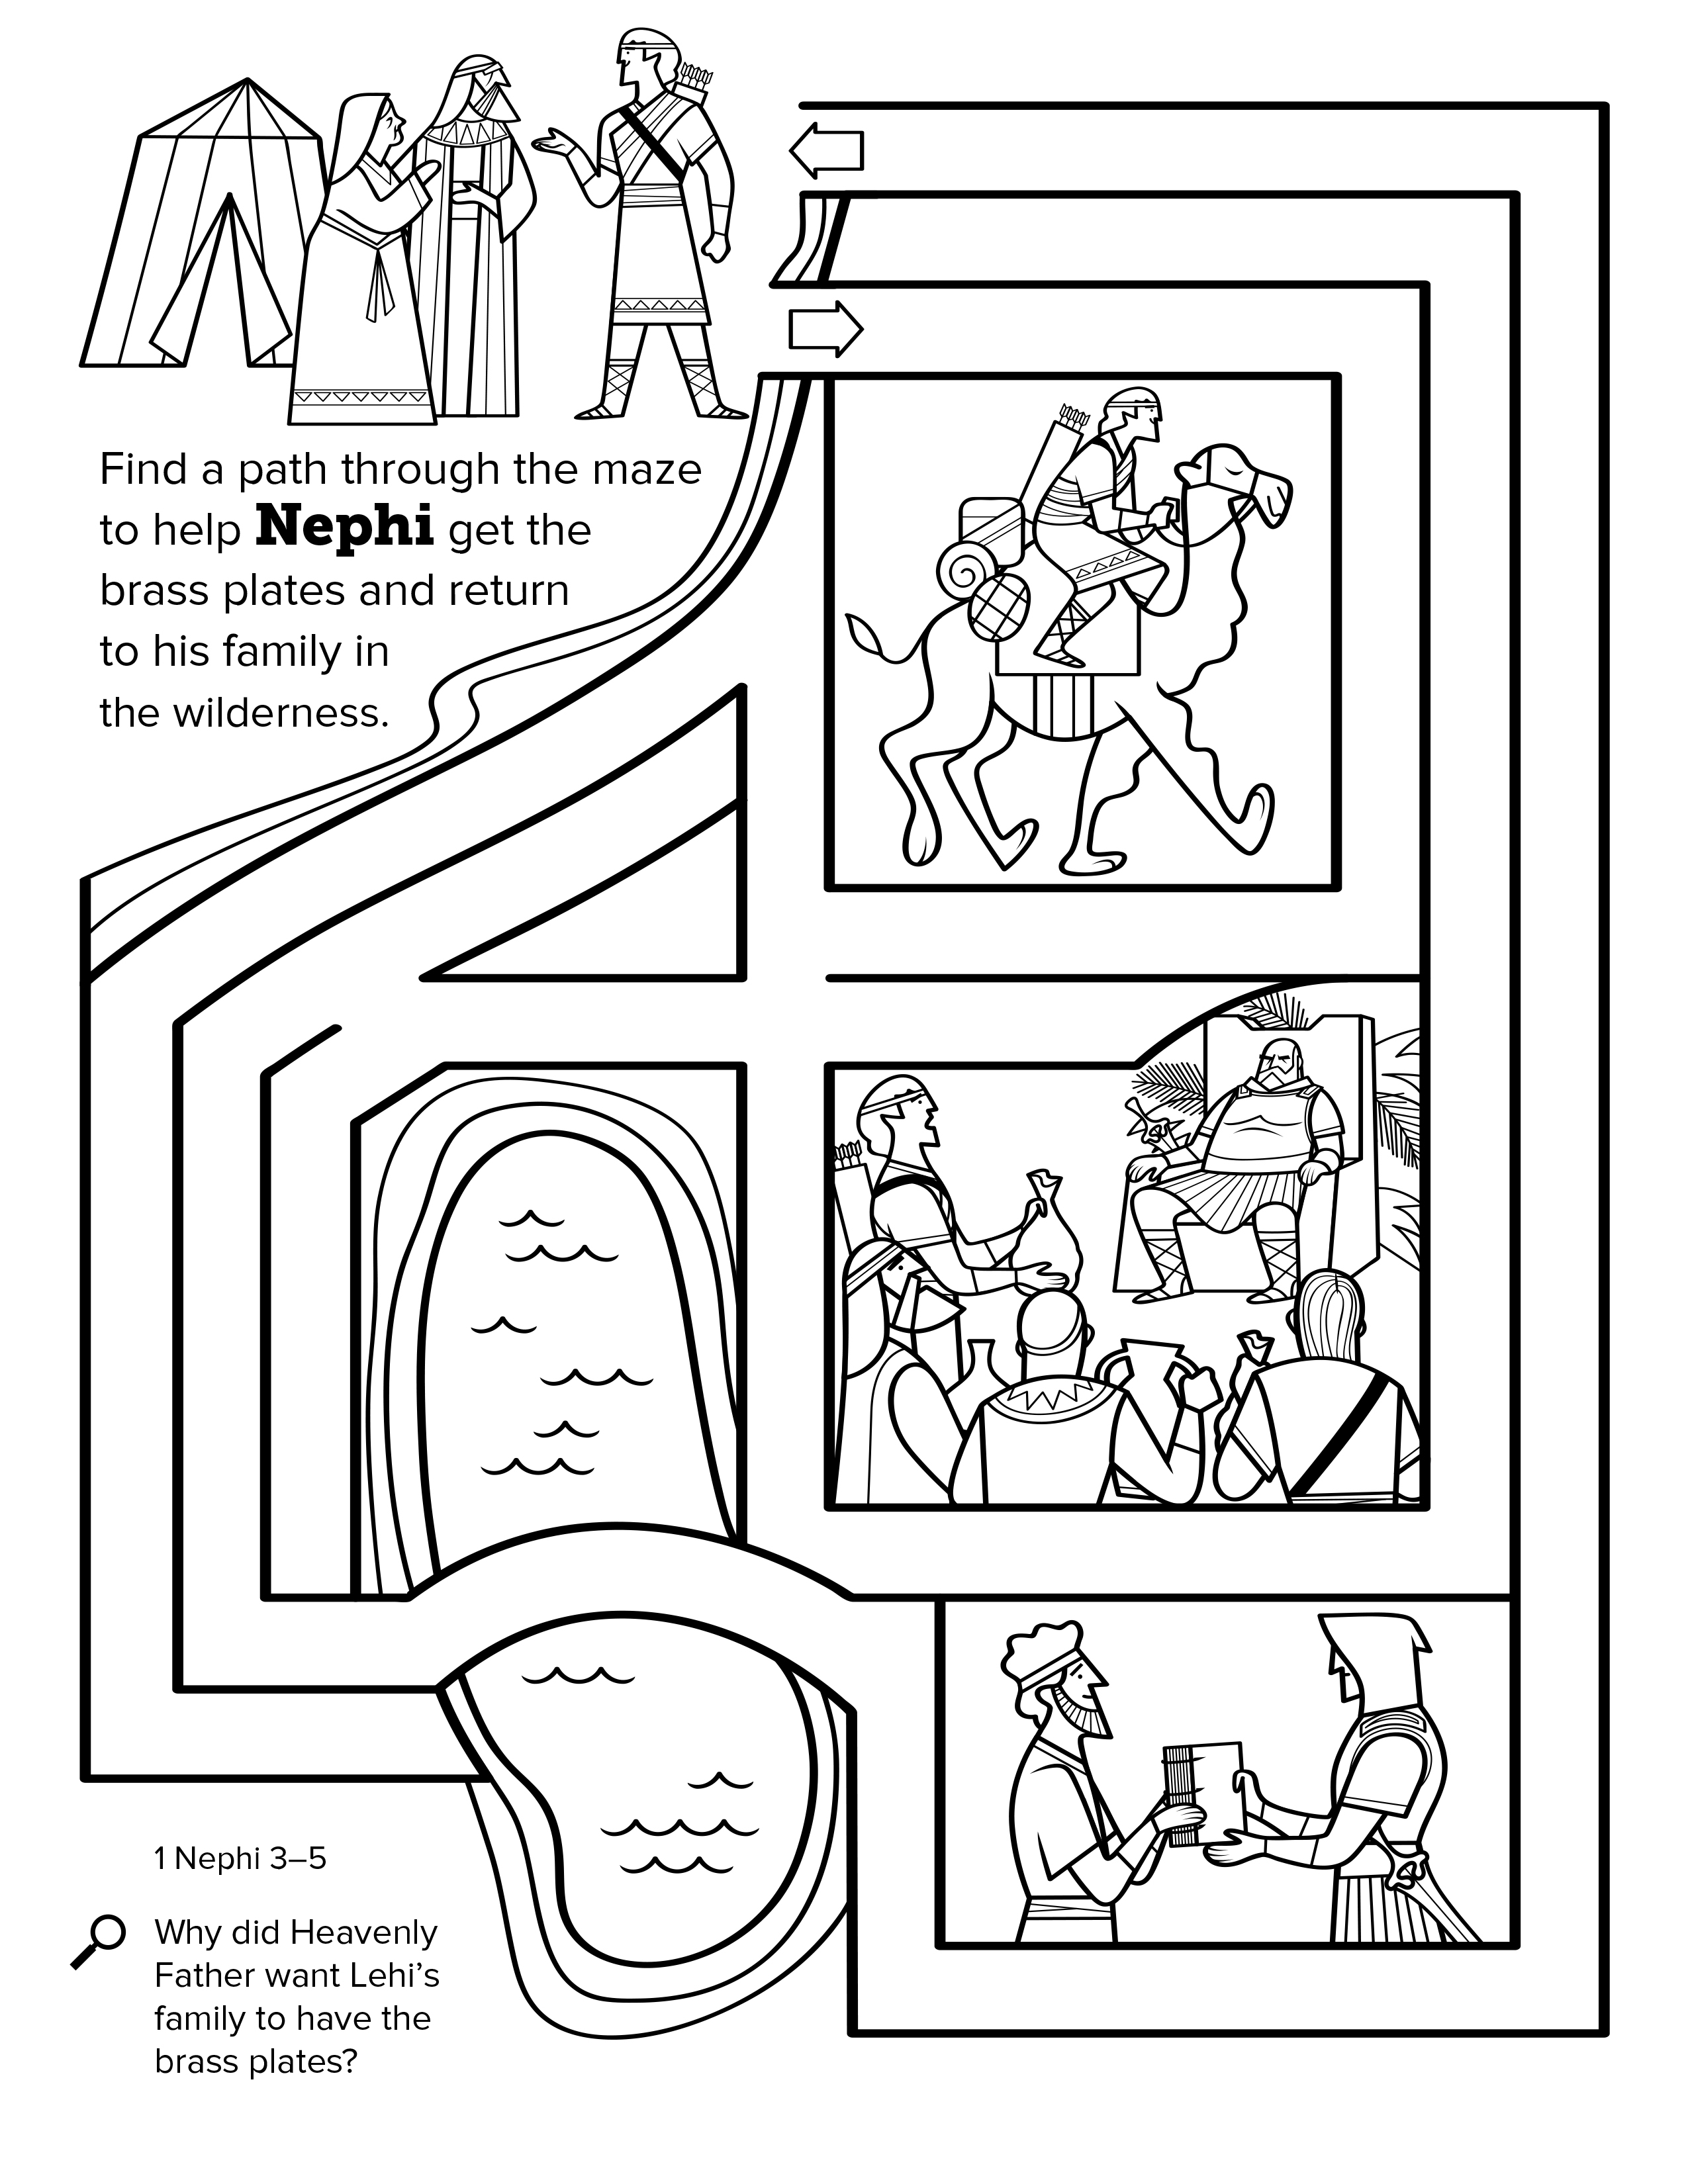 Barnabas Coloring Page Coloring Ideas Coloring Pages For Kids About Barnabas With Paul